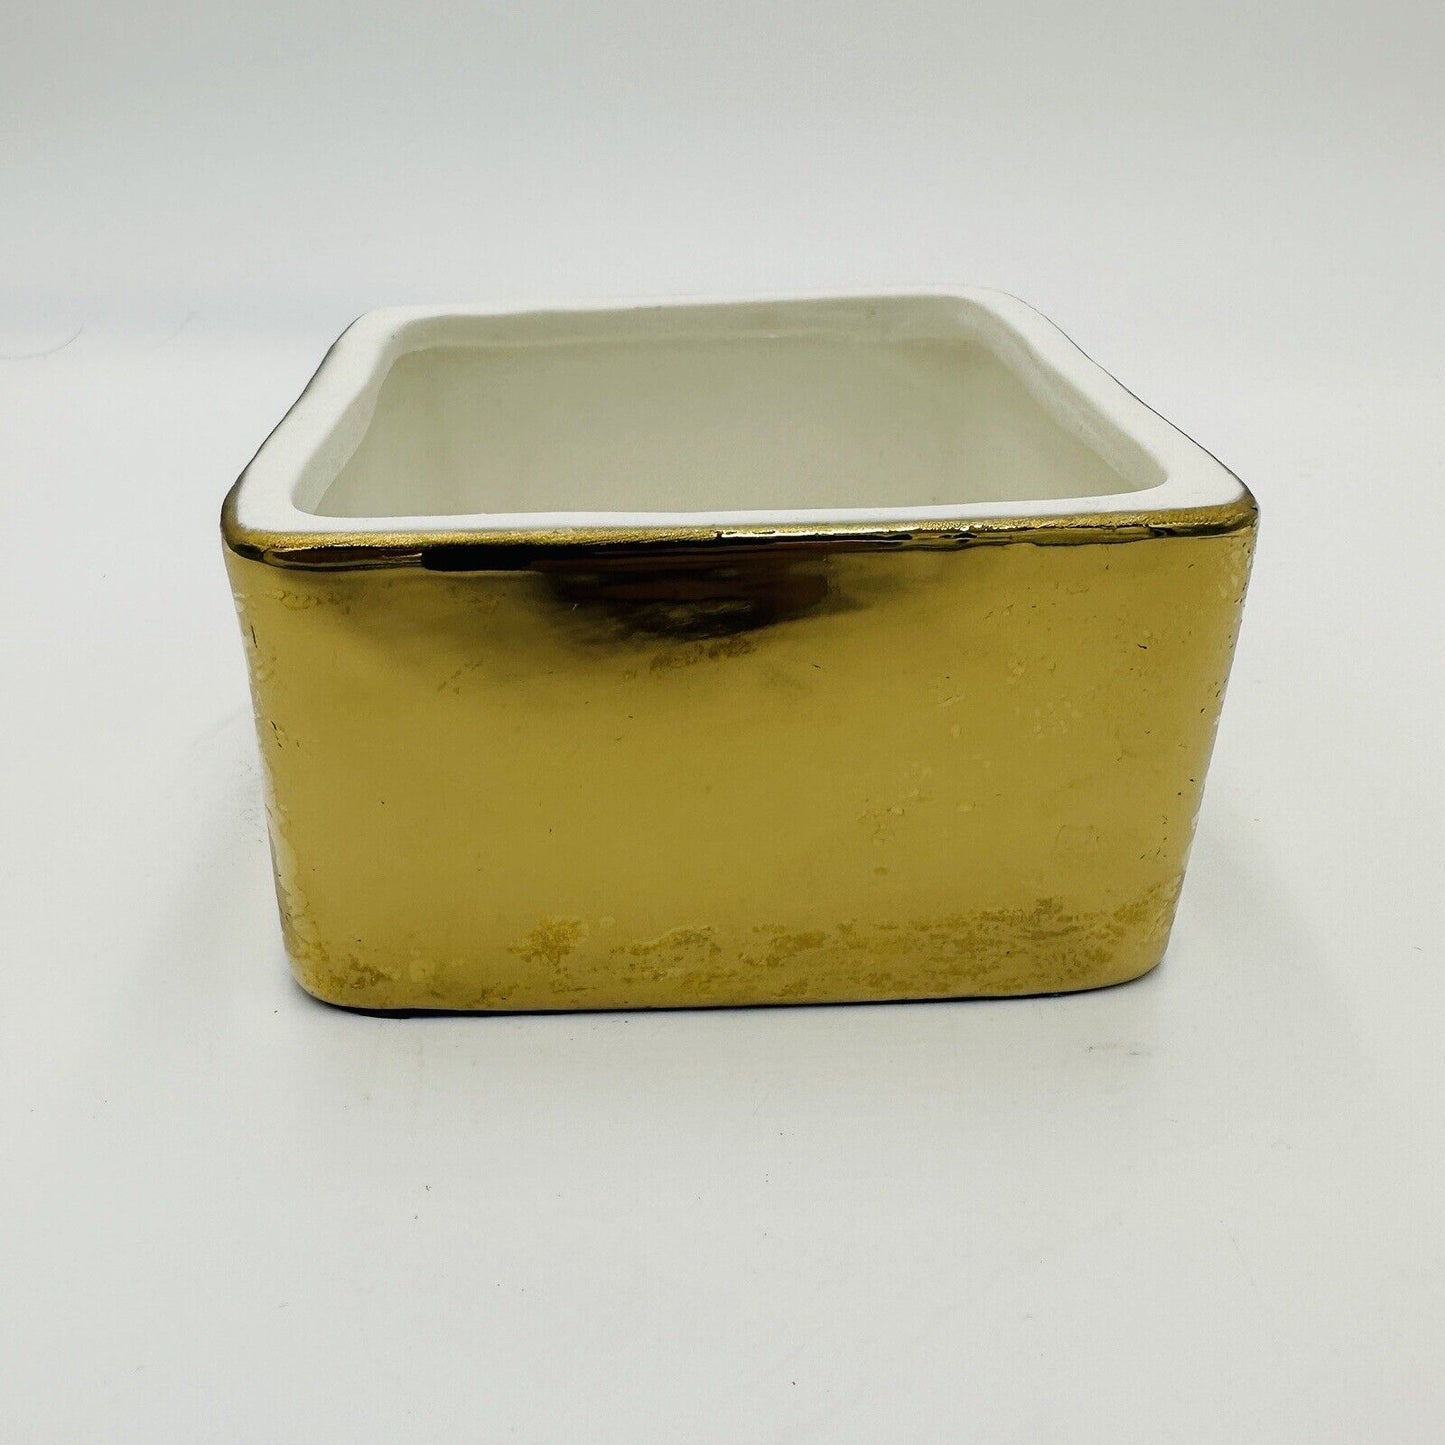 Pottery Barn The Emily and Meritt Gold Ceramic Box Replacement Missing lid